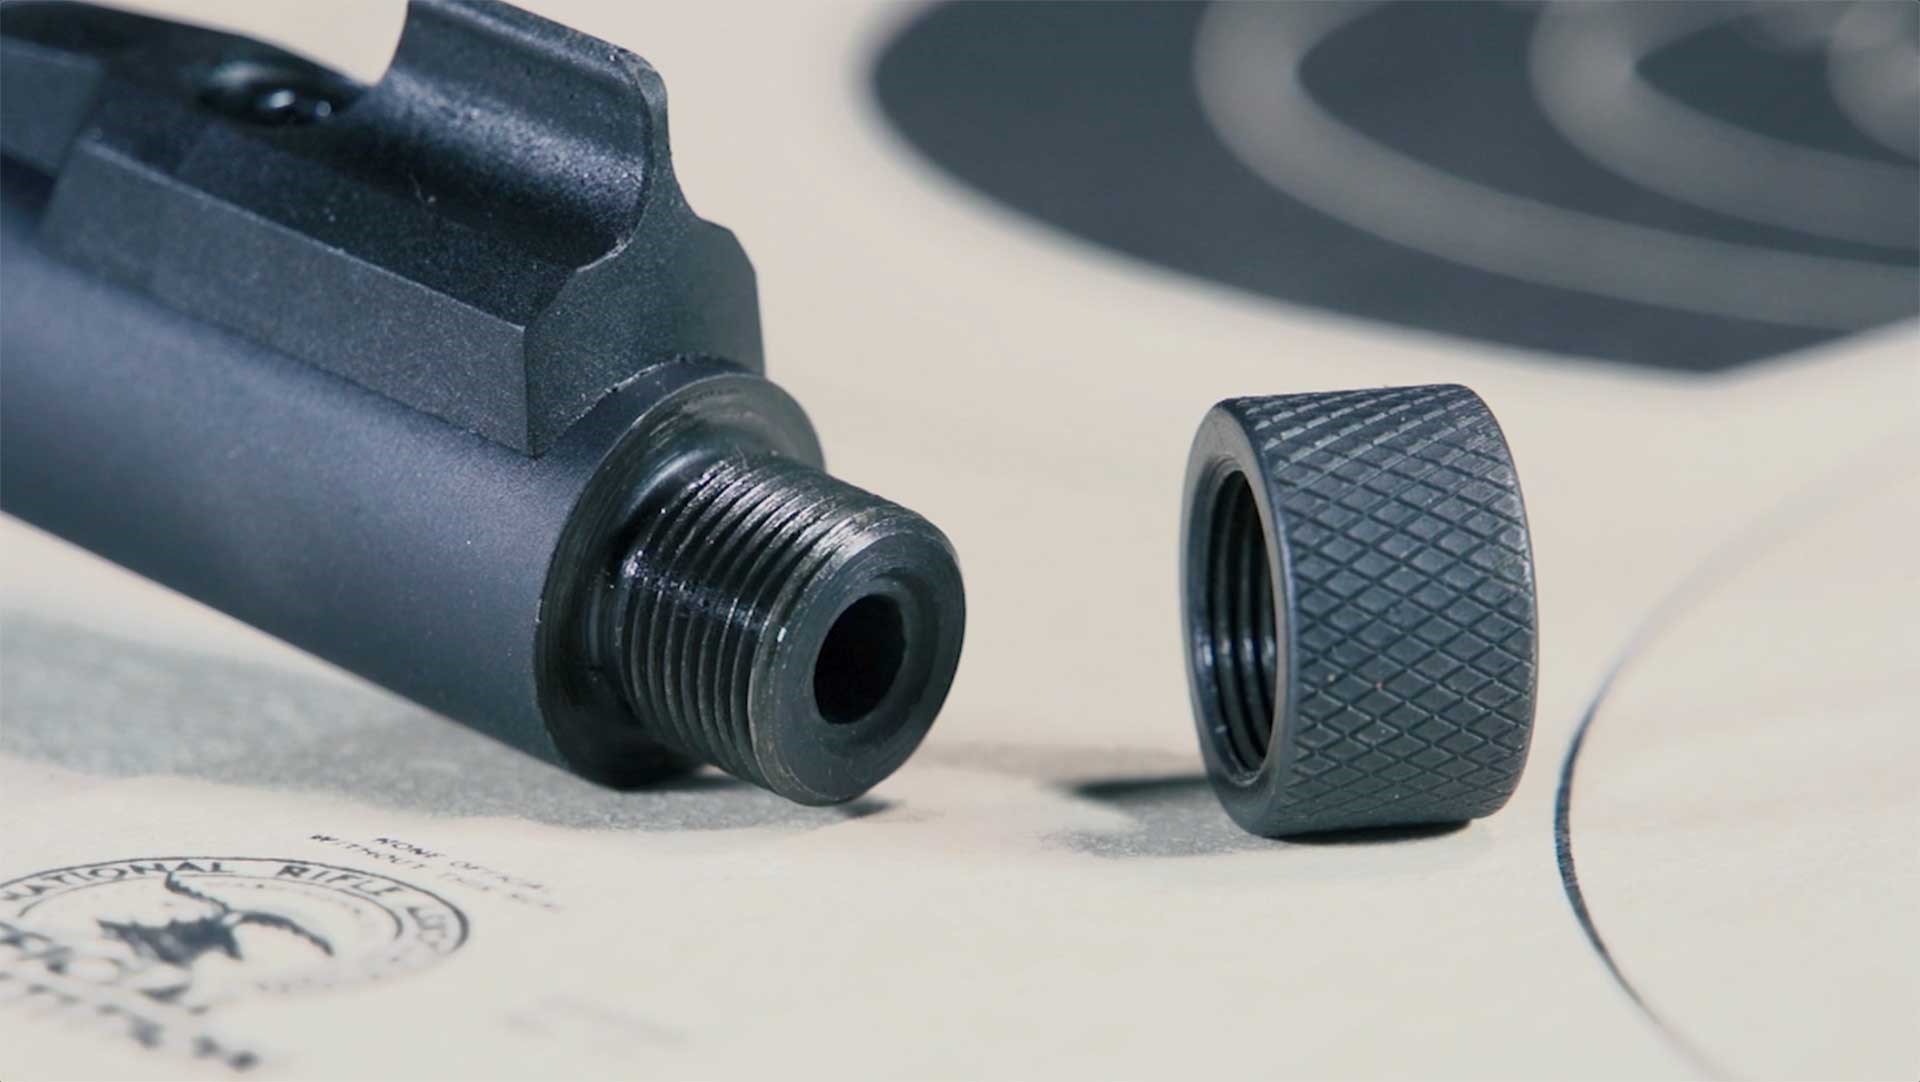 The threaded muzzle and black thread protector of the Winchester Wildcat 22 SR shown on top of an NRA bullseye target.